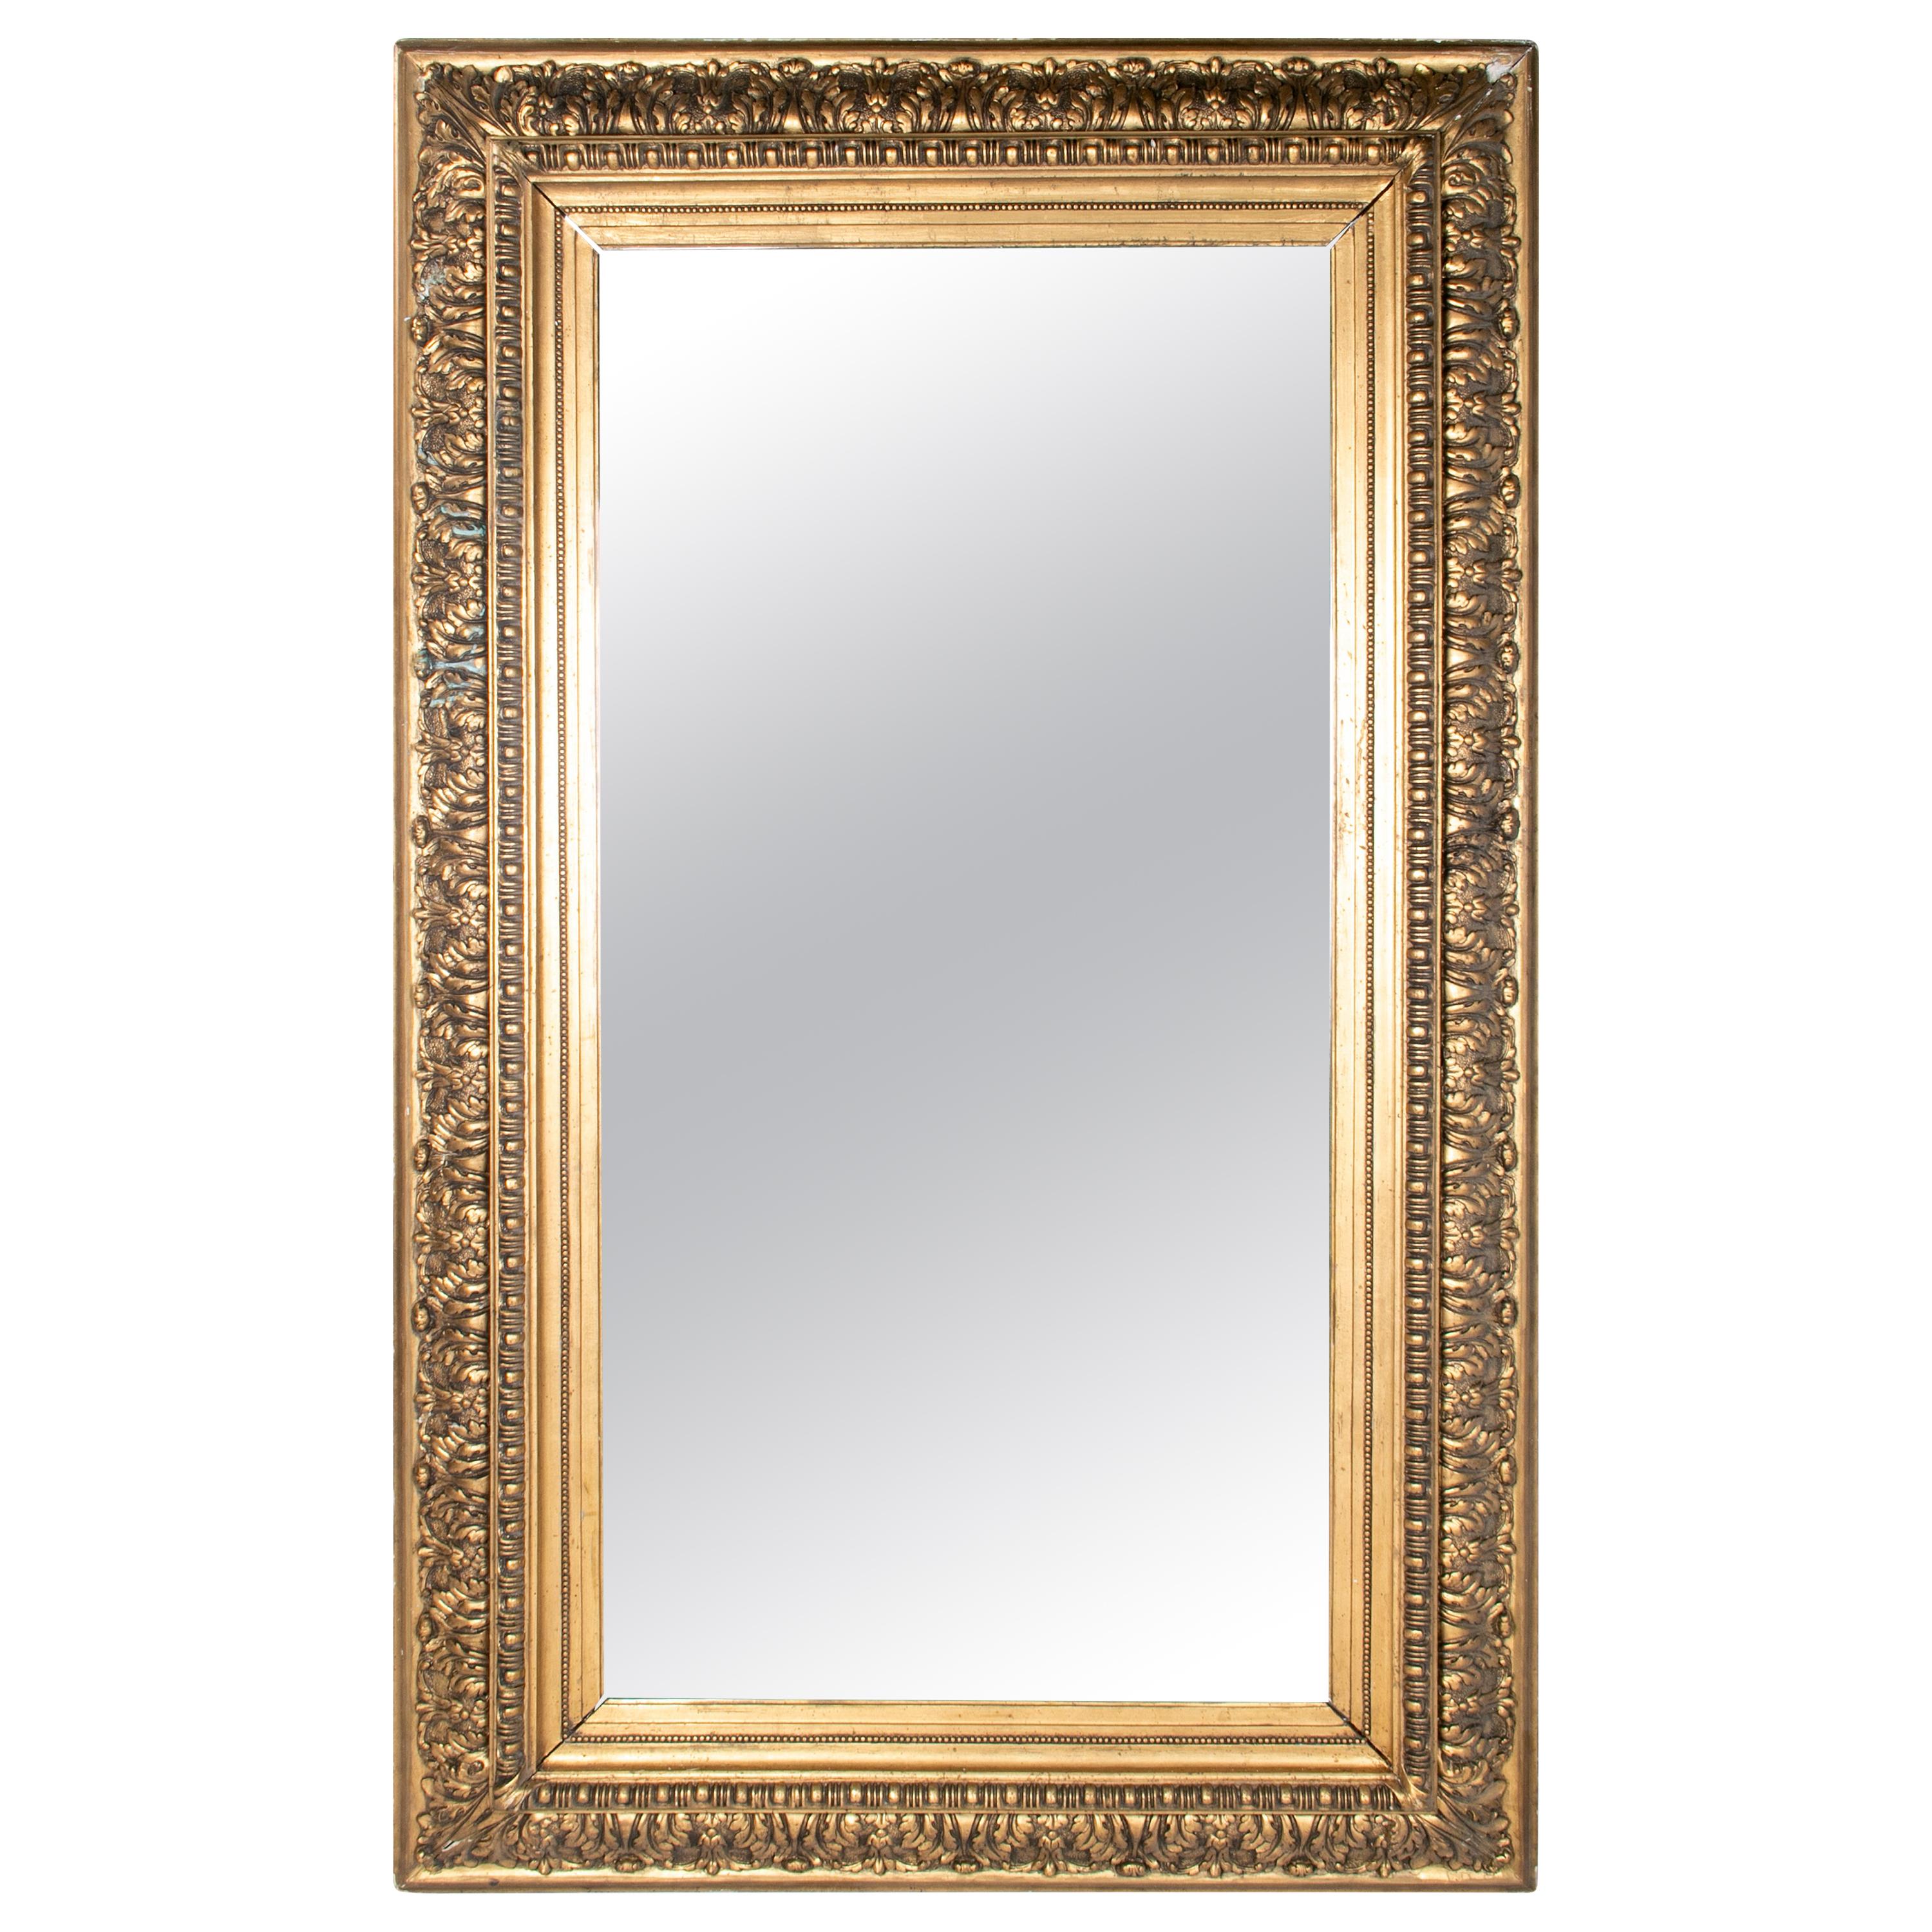 Late 19th Century Spanish Rectangular Mirror with Ornamental Gilded Frame For Sale